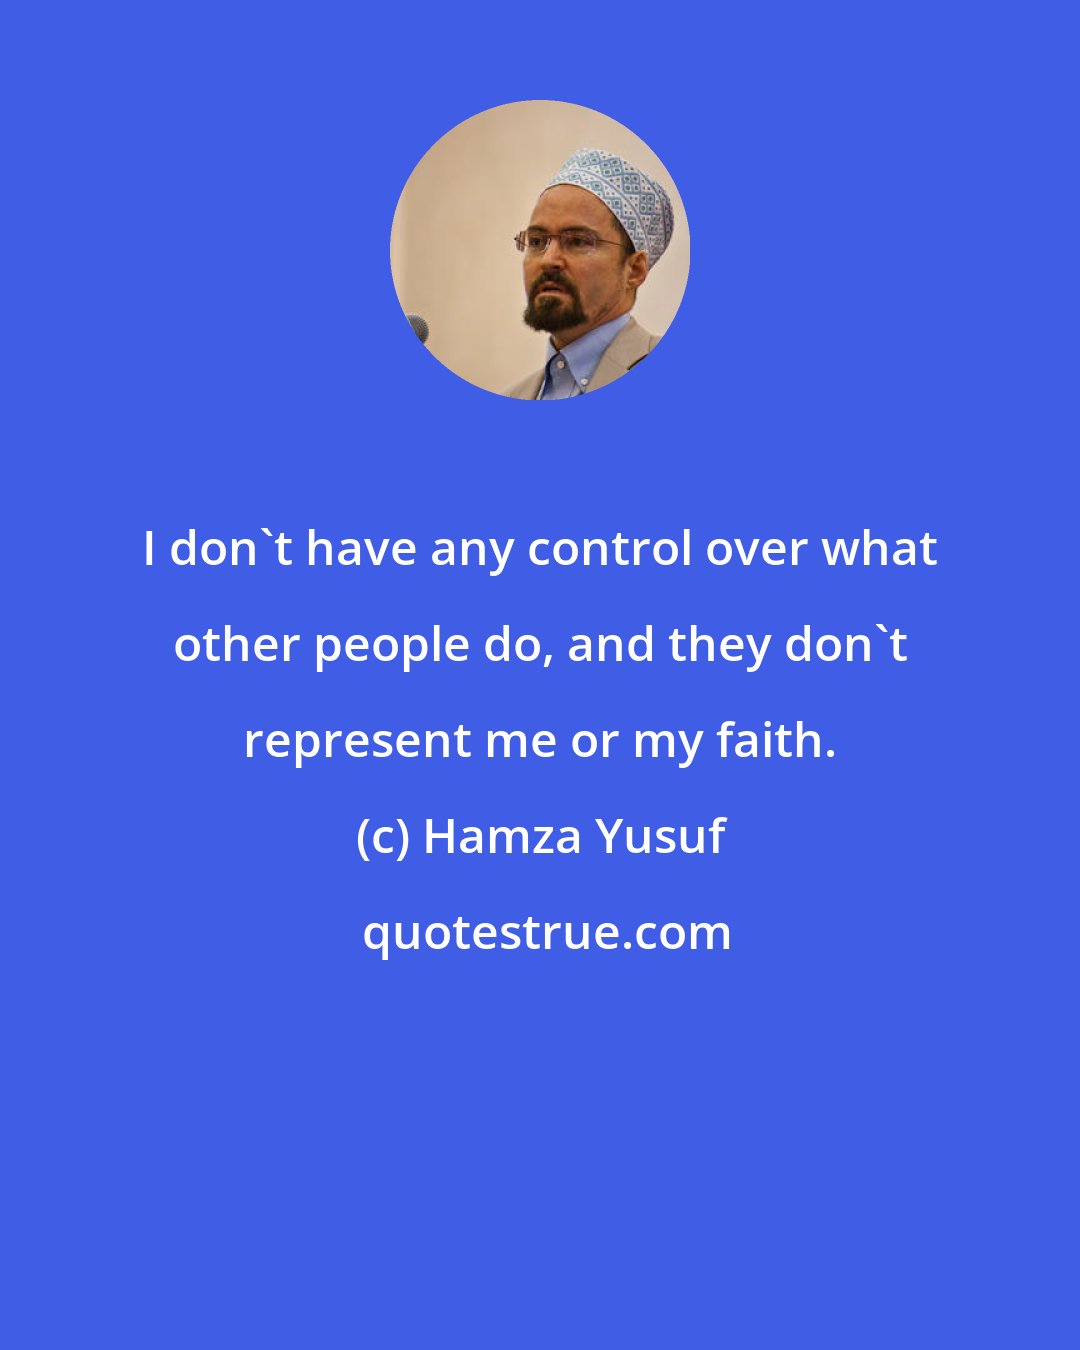 Hamza Yusuf: I don't have any control over what other people do, and they don't represent me or my faith.